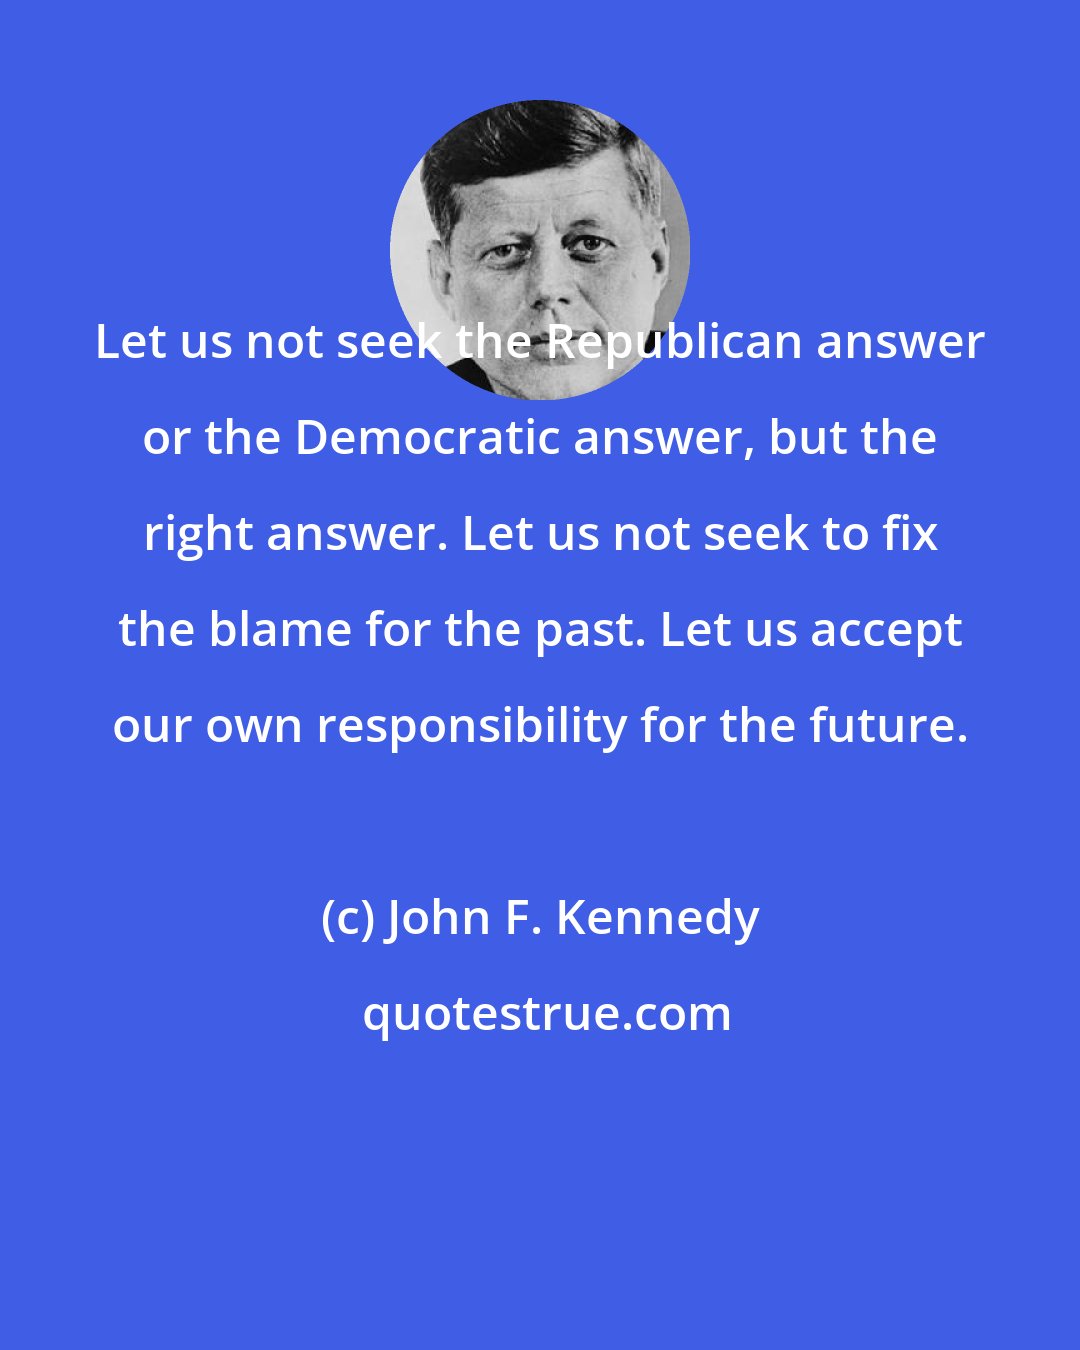 John F. Kennedy: Let us not seek the Republican answer or the Democratic answer, but the right answer. Let us not seek to fix the blame for the past. Let us accept our own responsibility for the future.